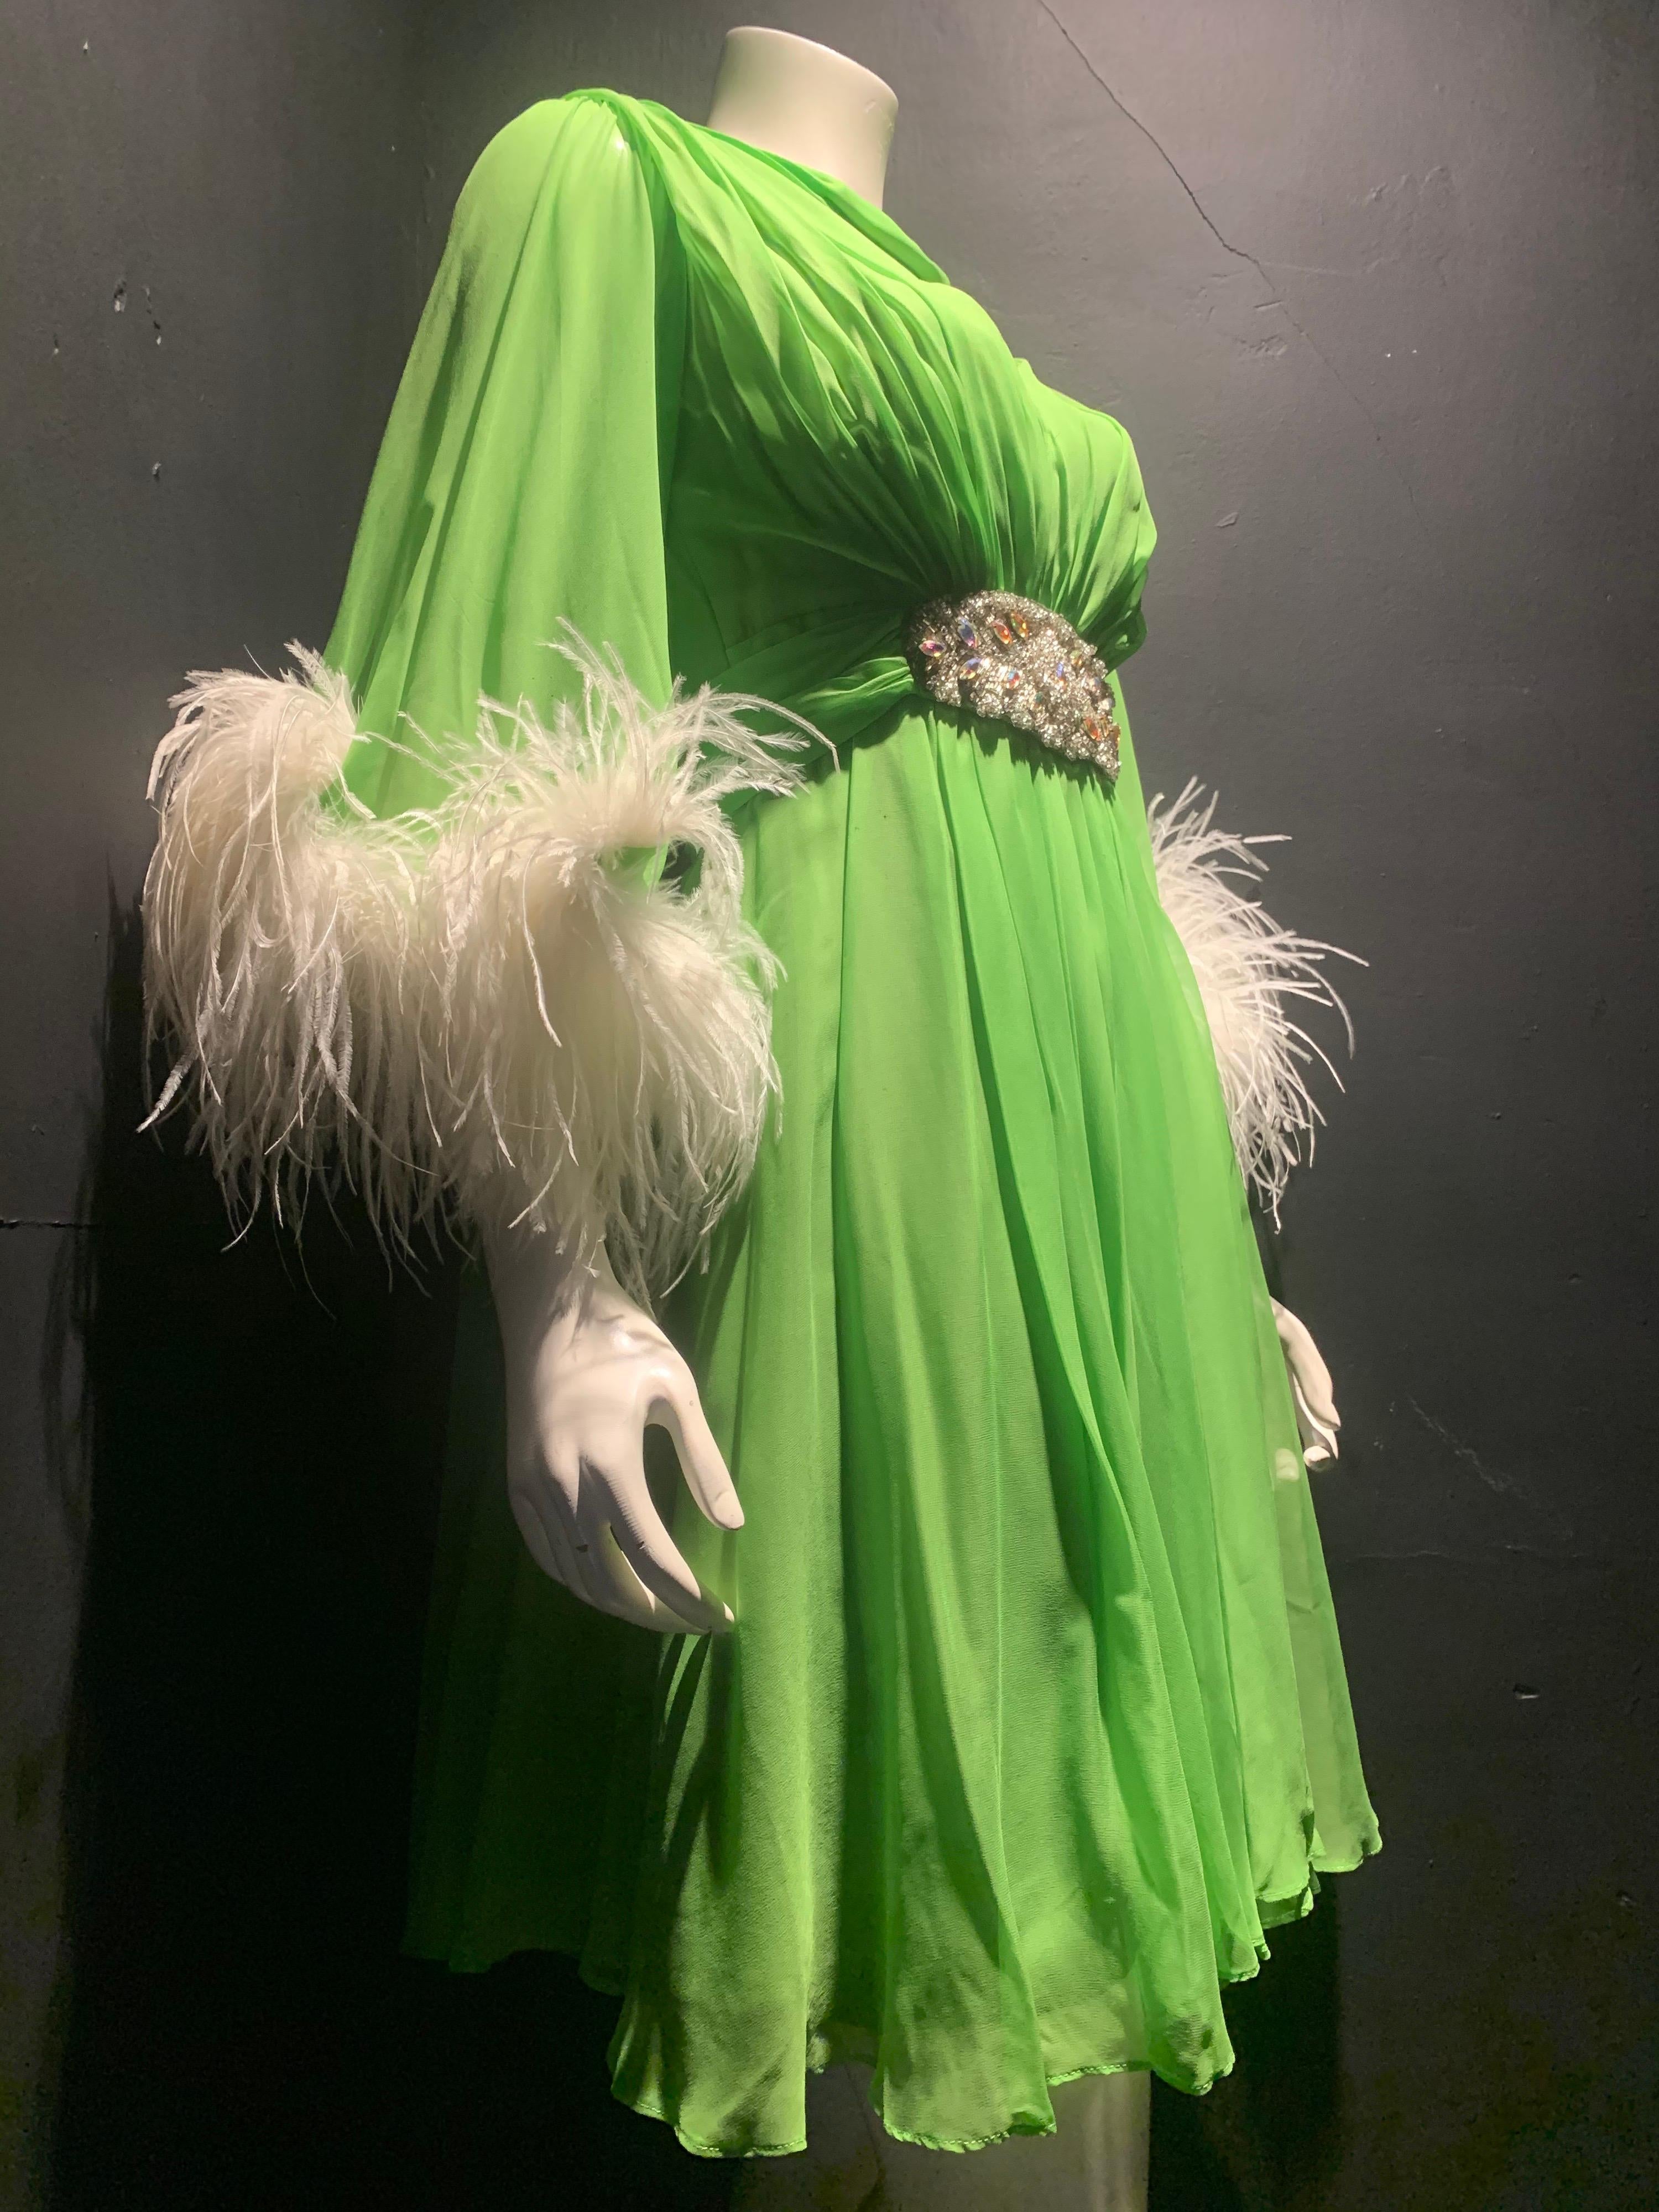 1960s Unlabeled lime green silk chiffon cocktail dress with jeweled belt and ostrich feather cuffs. Fully lined. Zipper back. Waterfall chiffon back and gathered bust. Size 4.